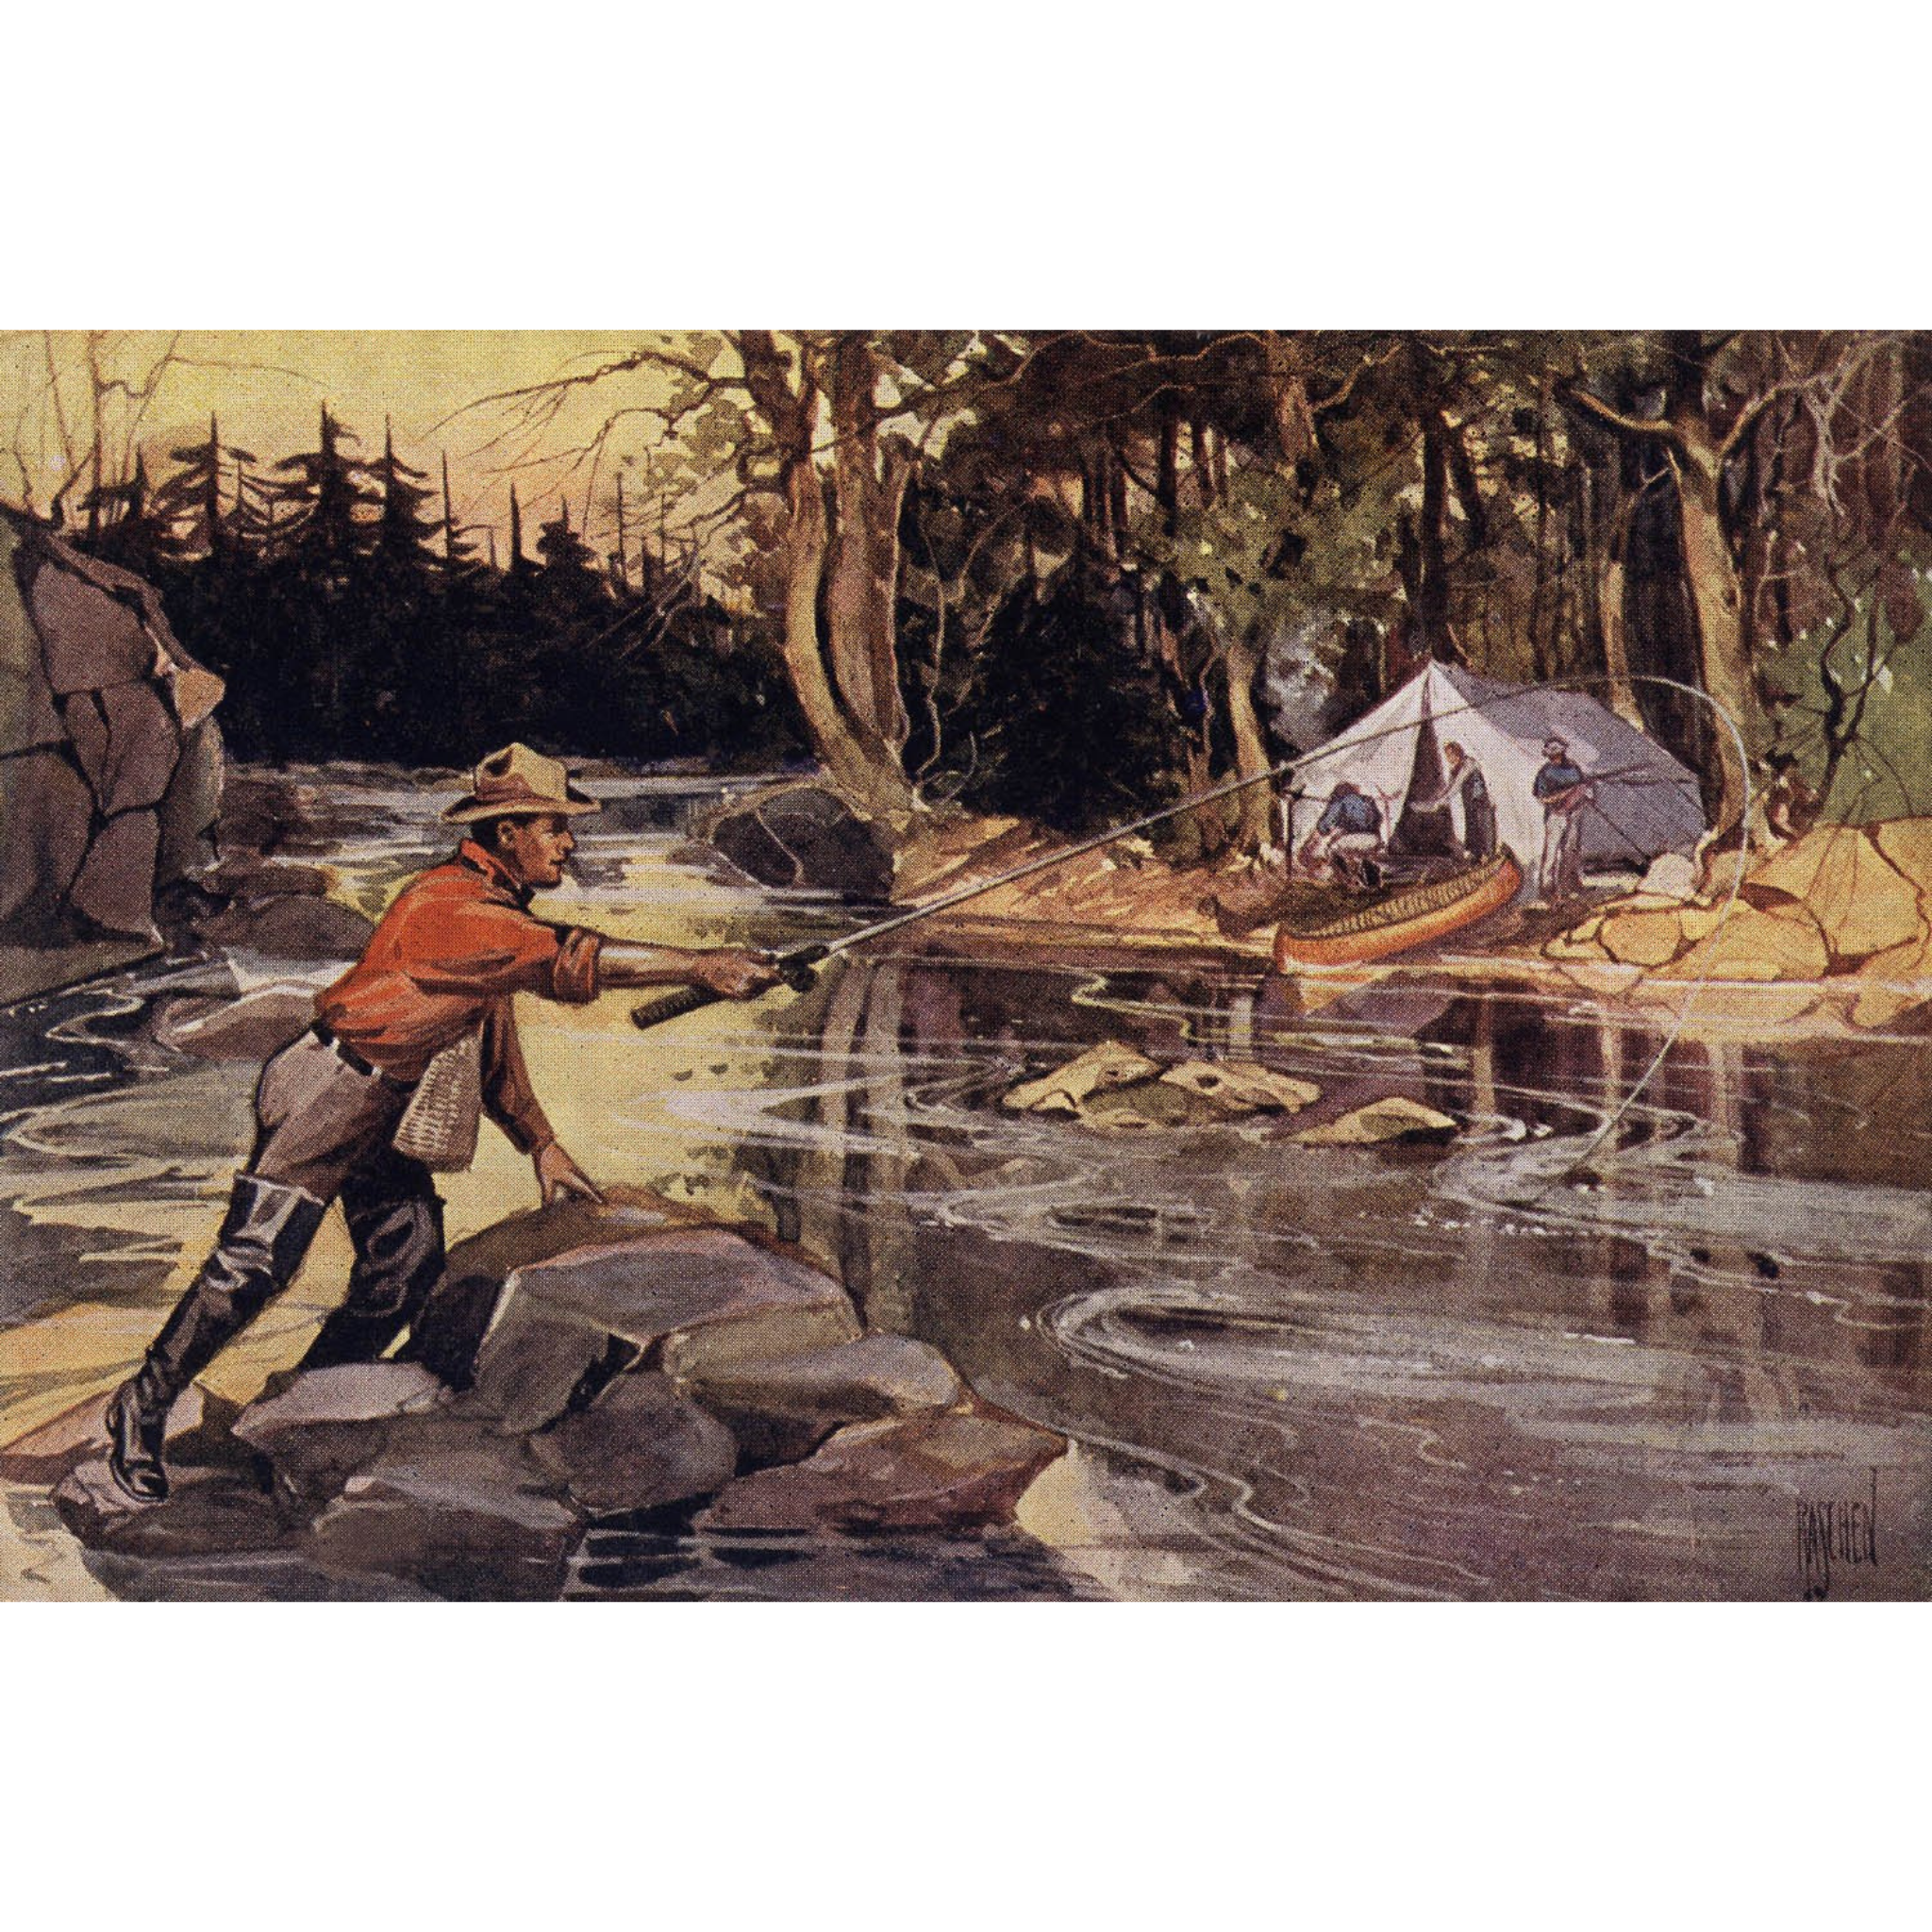 Man in Red Shirt Fishing by Camp - ca. 1925 Lithograph